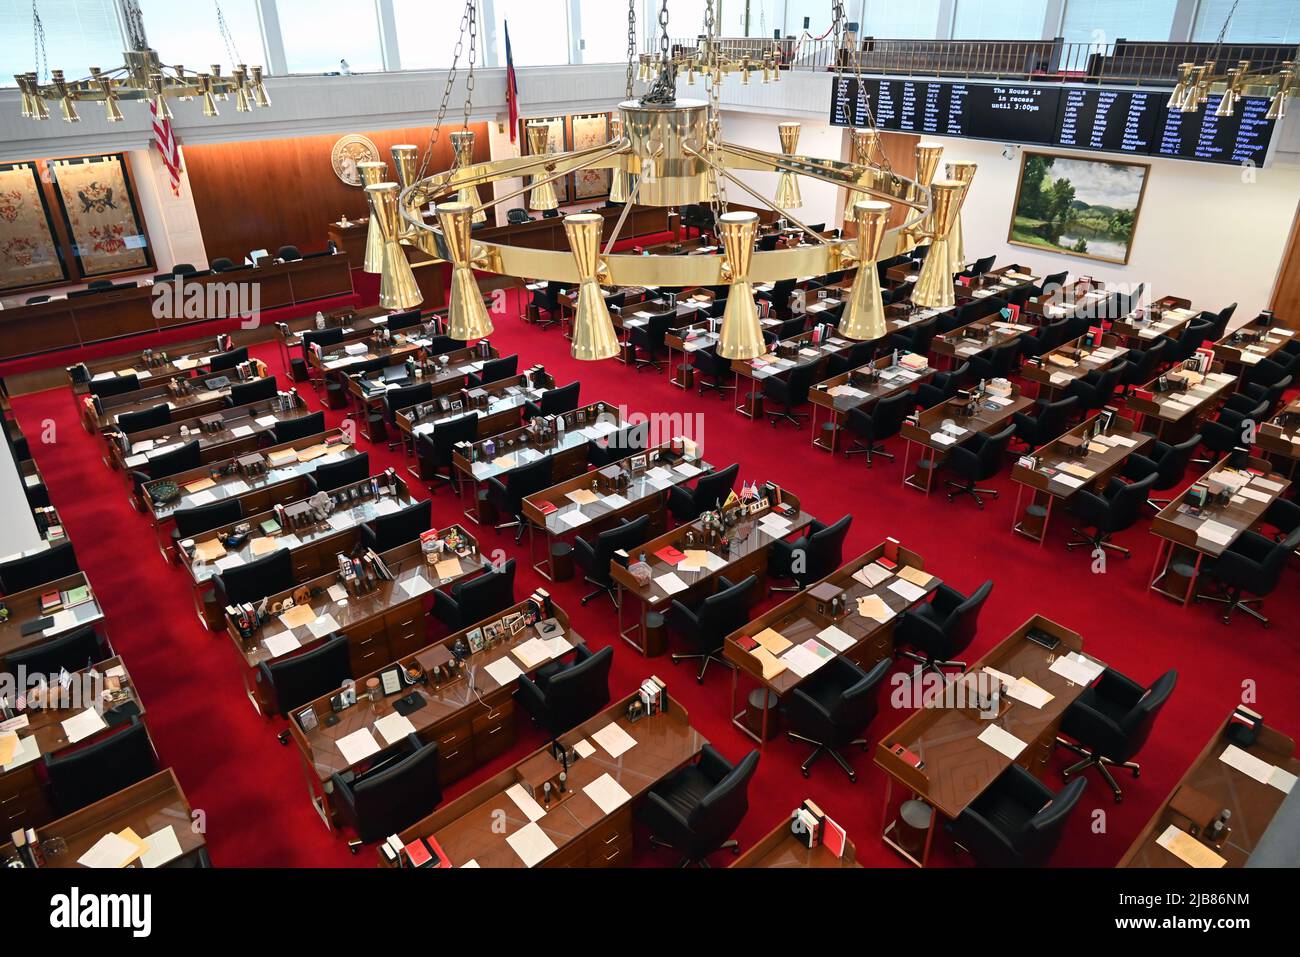 The House Chamber at the North Carolina Legislative Building, opened in 1963 and devoted solely to the legislative branch of state government. Stock Photo